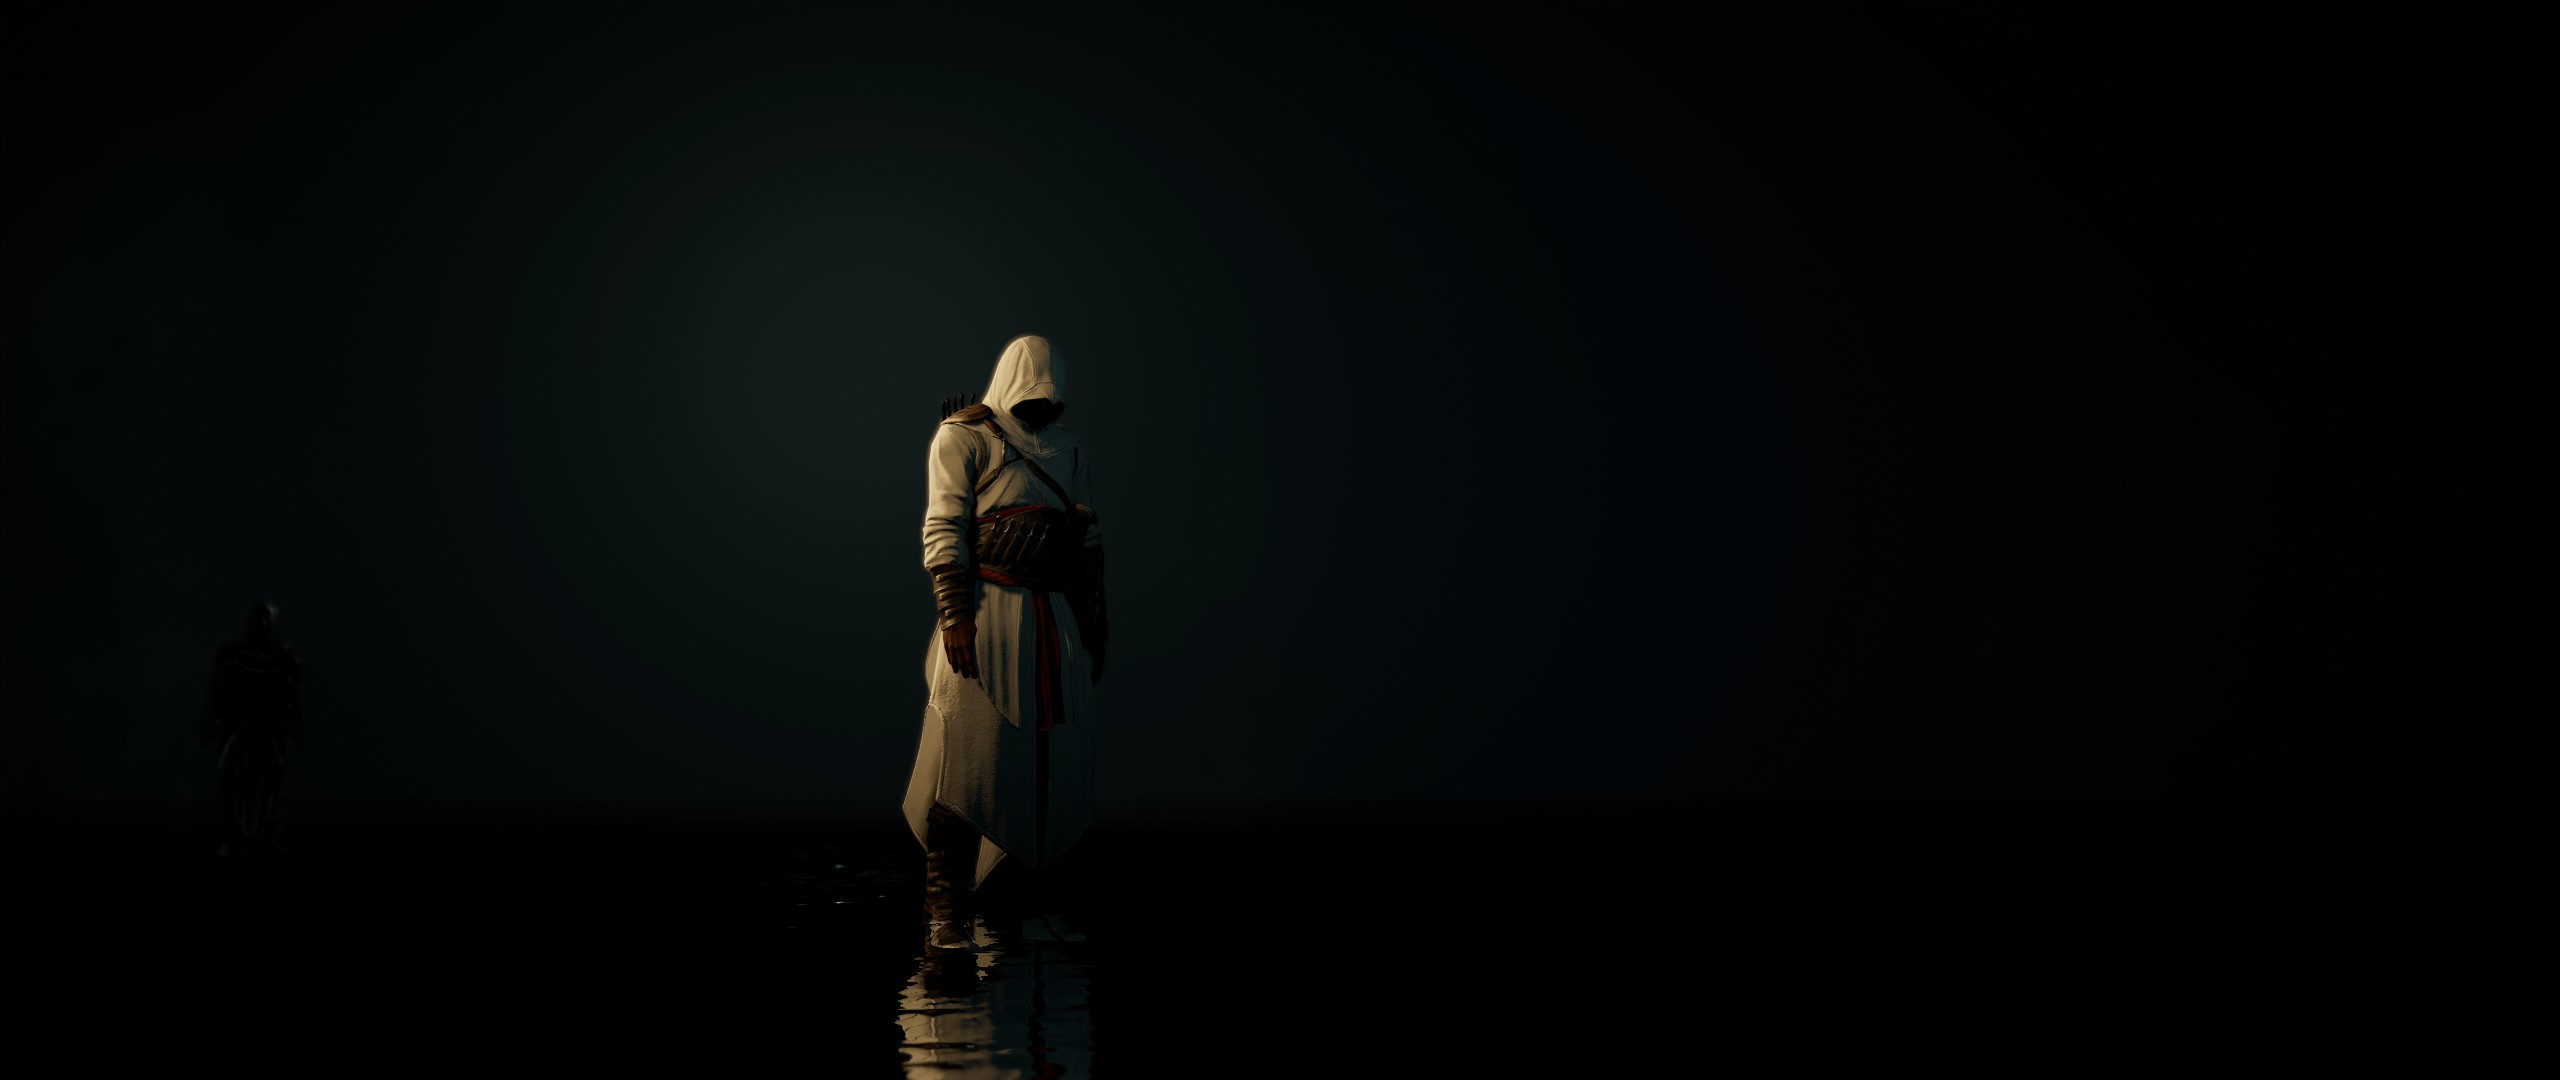 General 2560x1080 Assassin's Creed video games simple background video game characters black background reflection